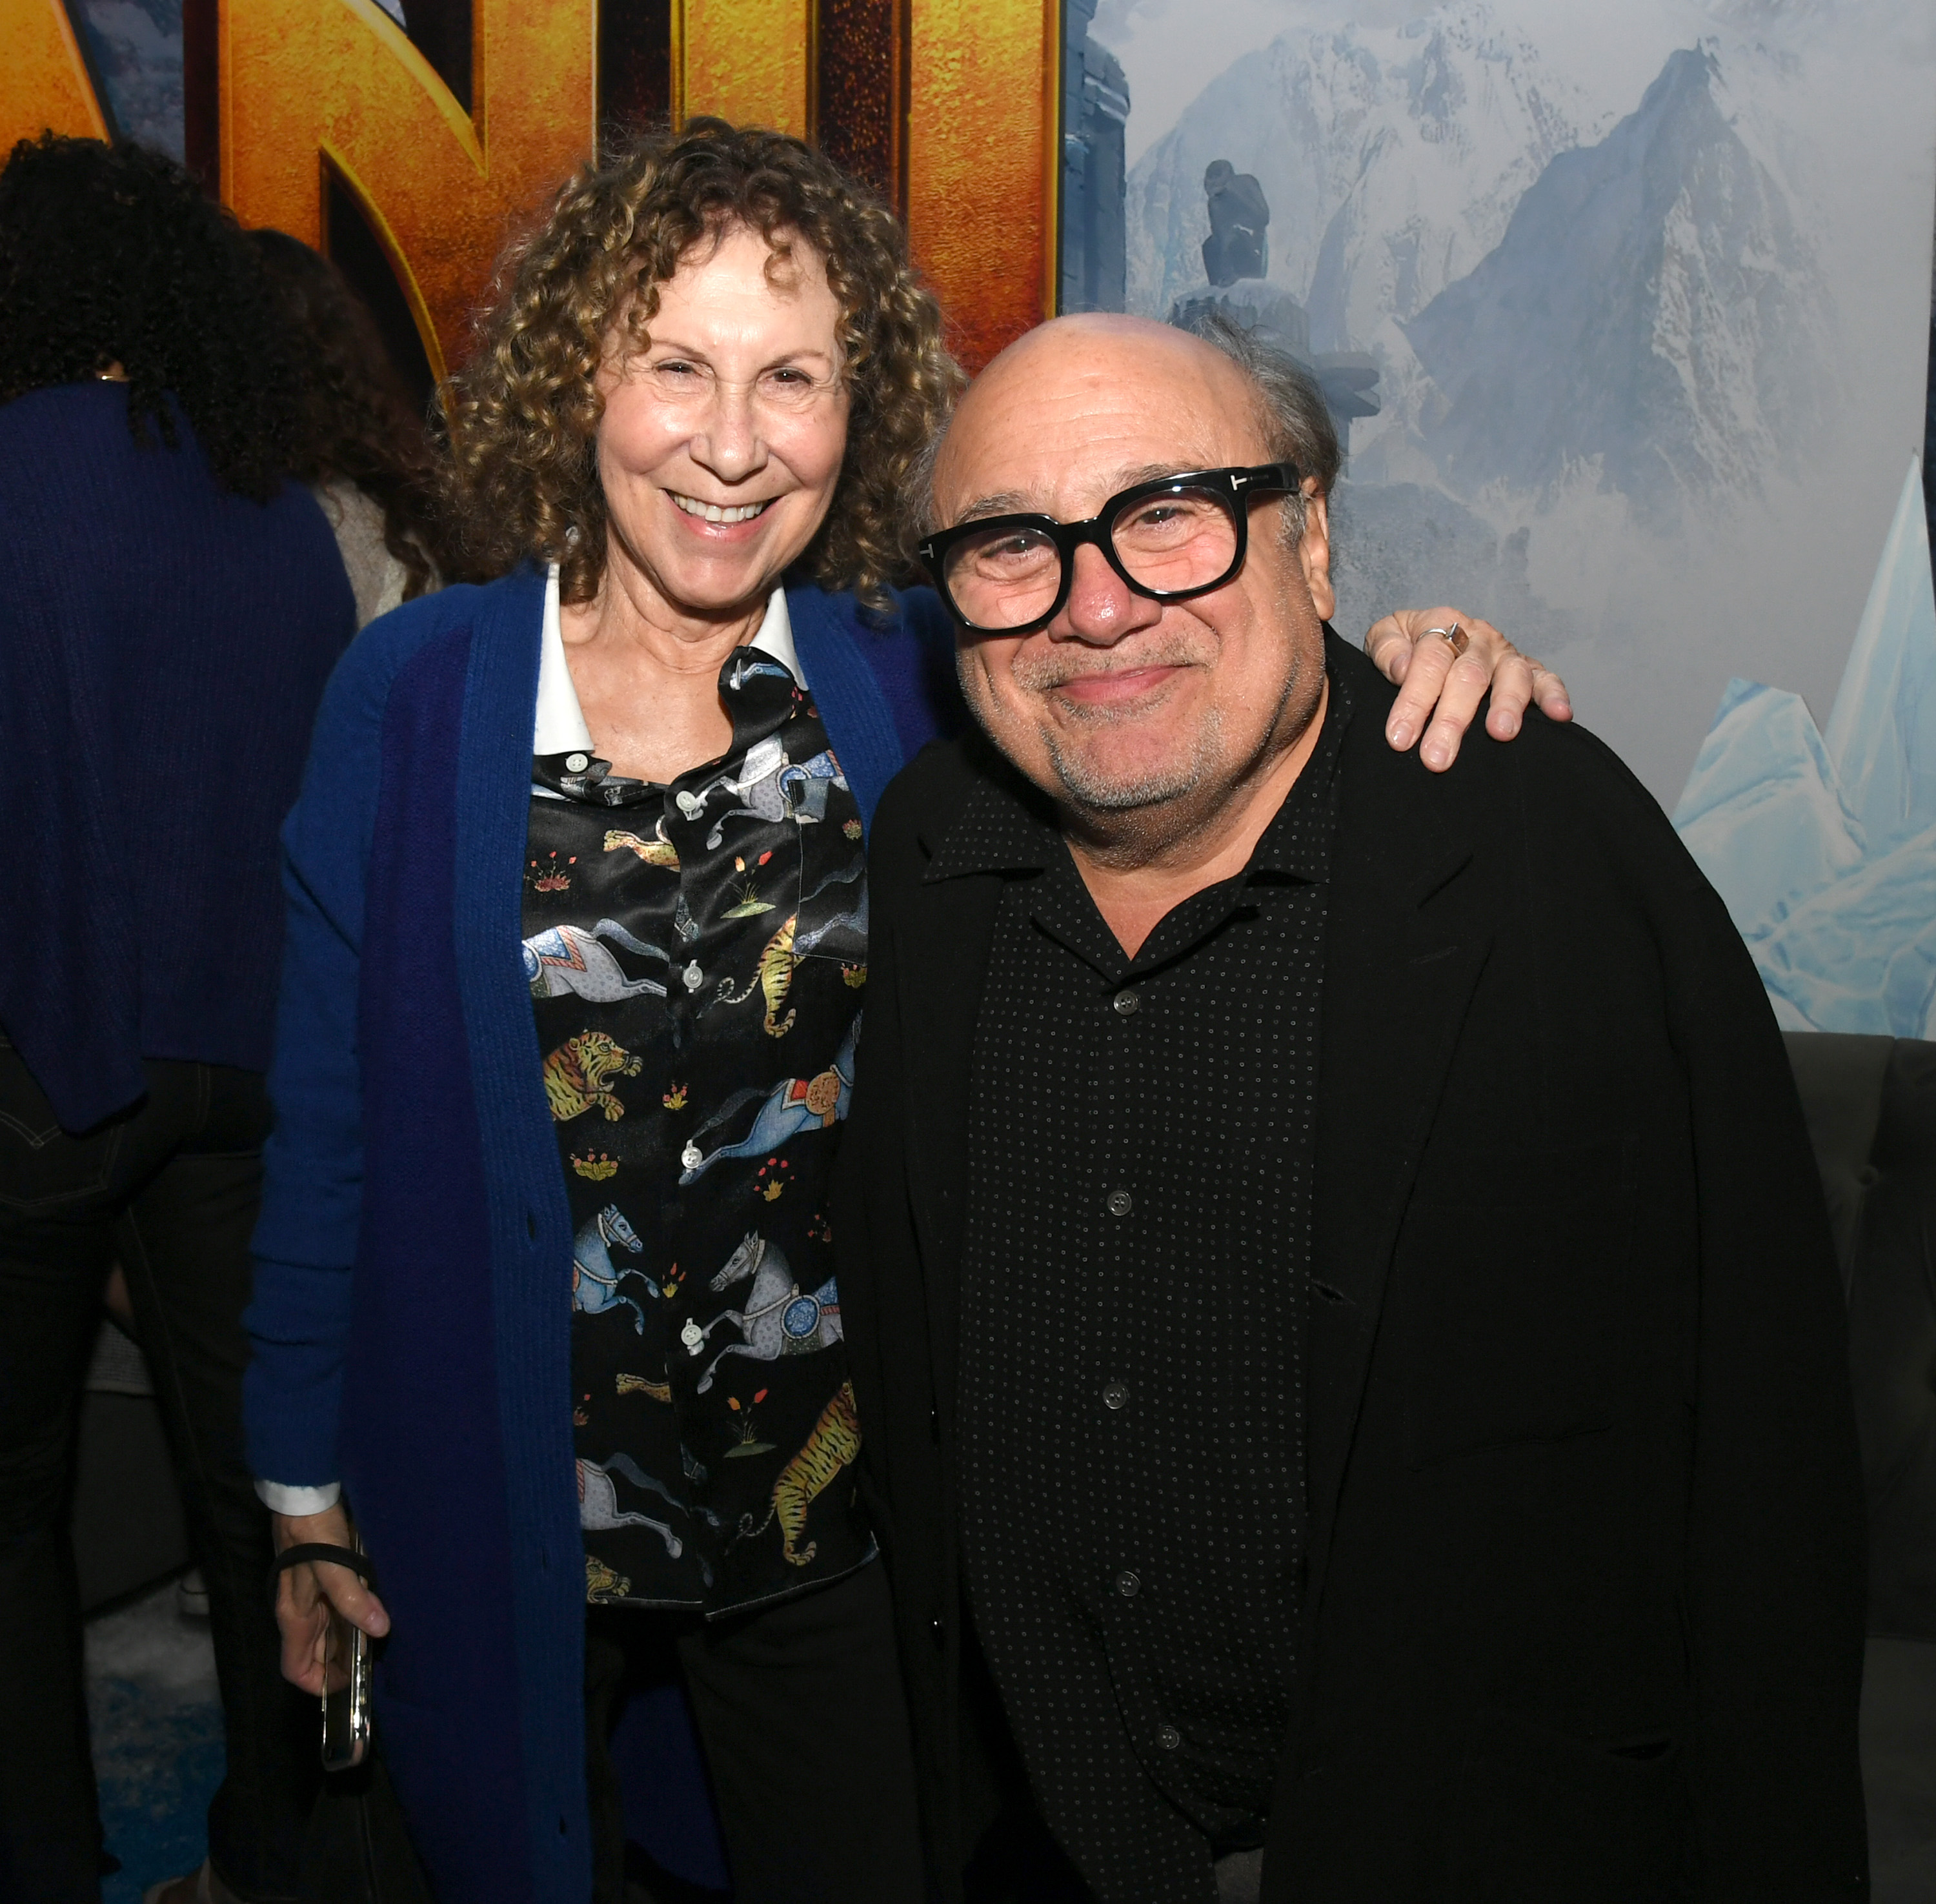 Rhea Perlman and Danny Devito at the Broadway Opening Night Performance of "Honeymoon in Vegas" in New York City on January 15, 2014 | Source: Getty Images